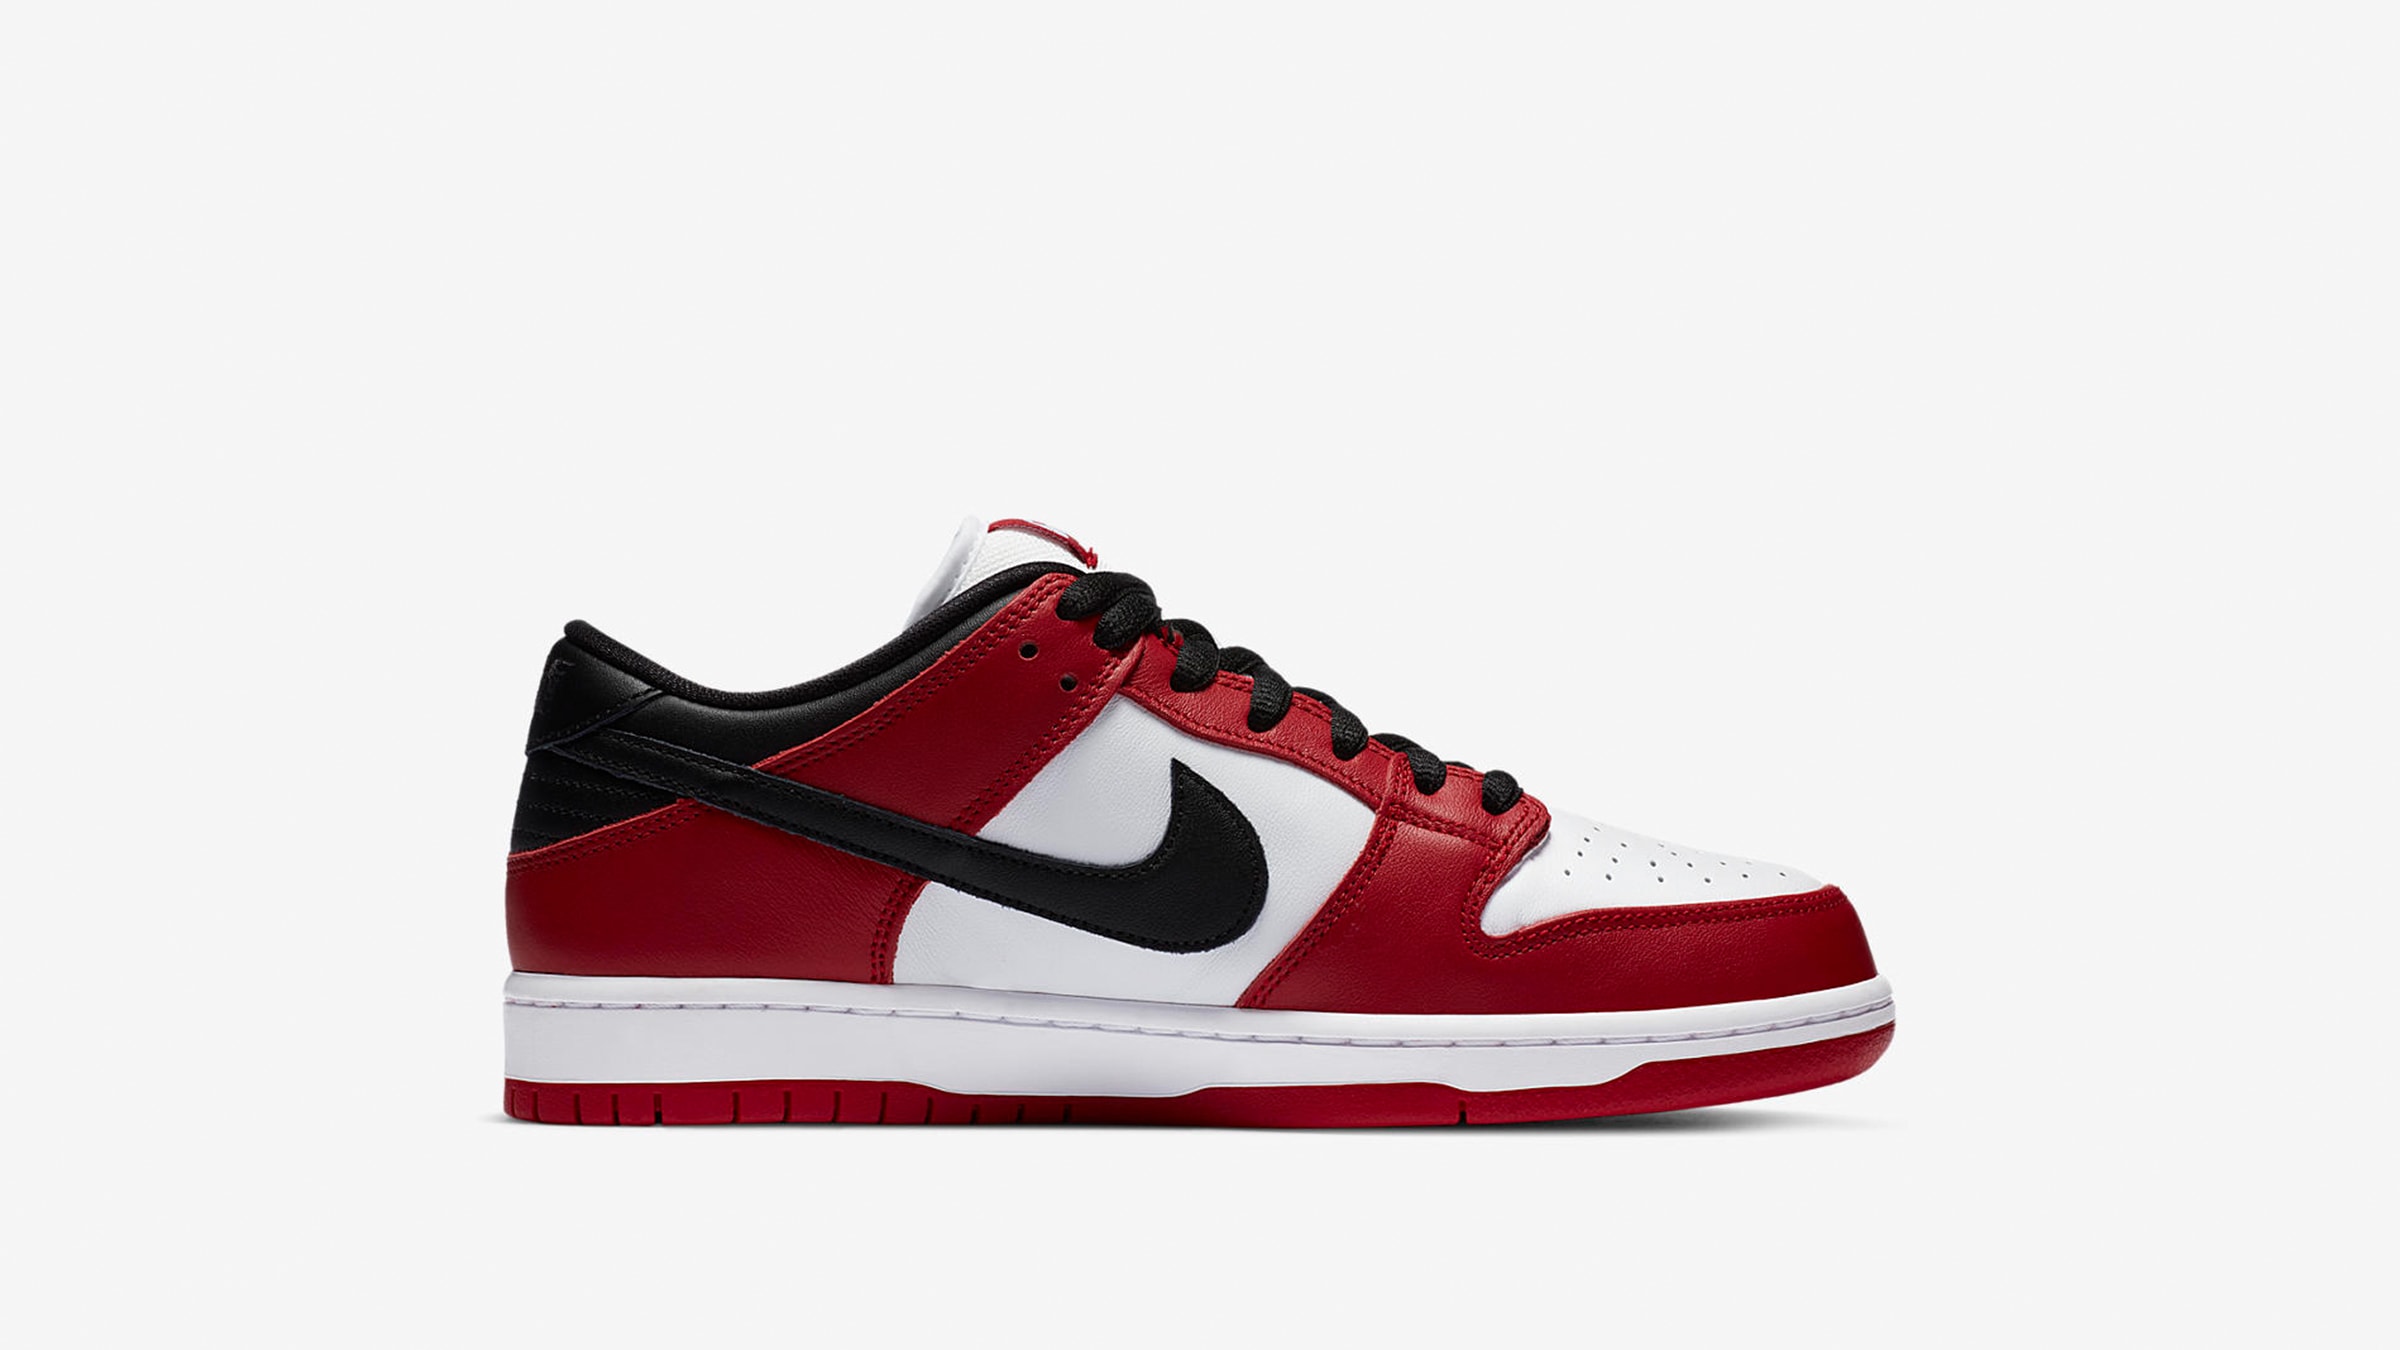 Nike SB Dunk Low Pro Chicago (Red, Black & White) | END. Launches